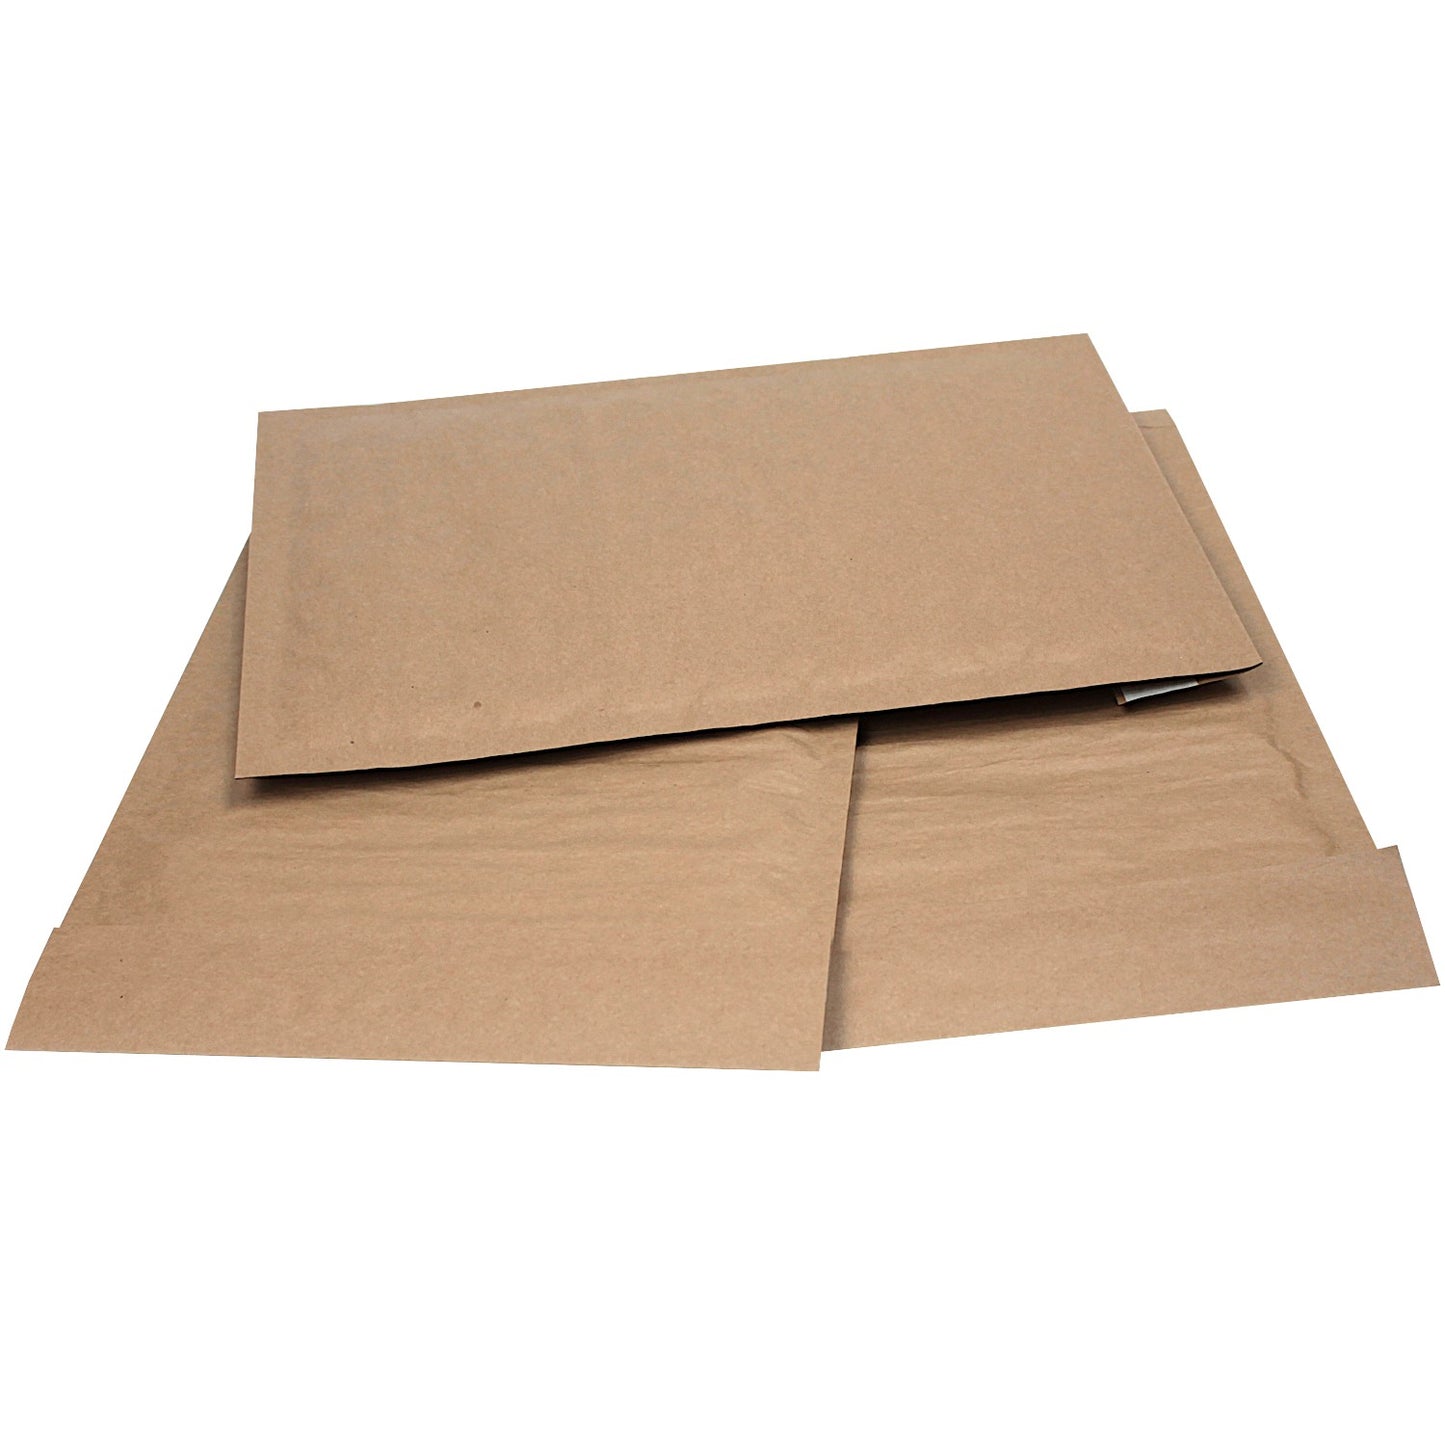 460x335mm Recyclable Padded Envelopes - Box of 50 - Intrinsic Paper Straws